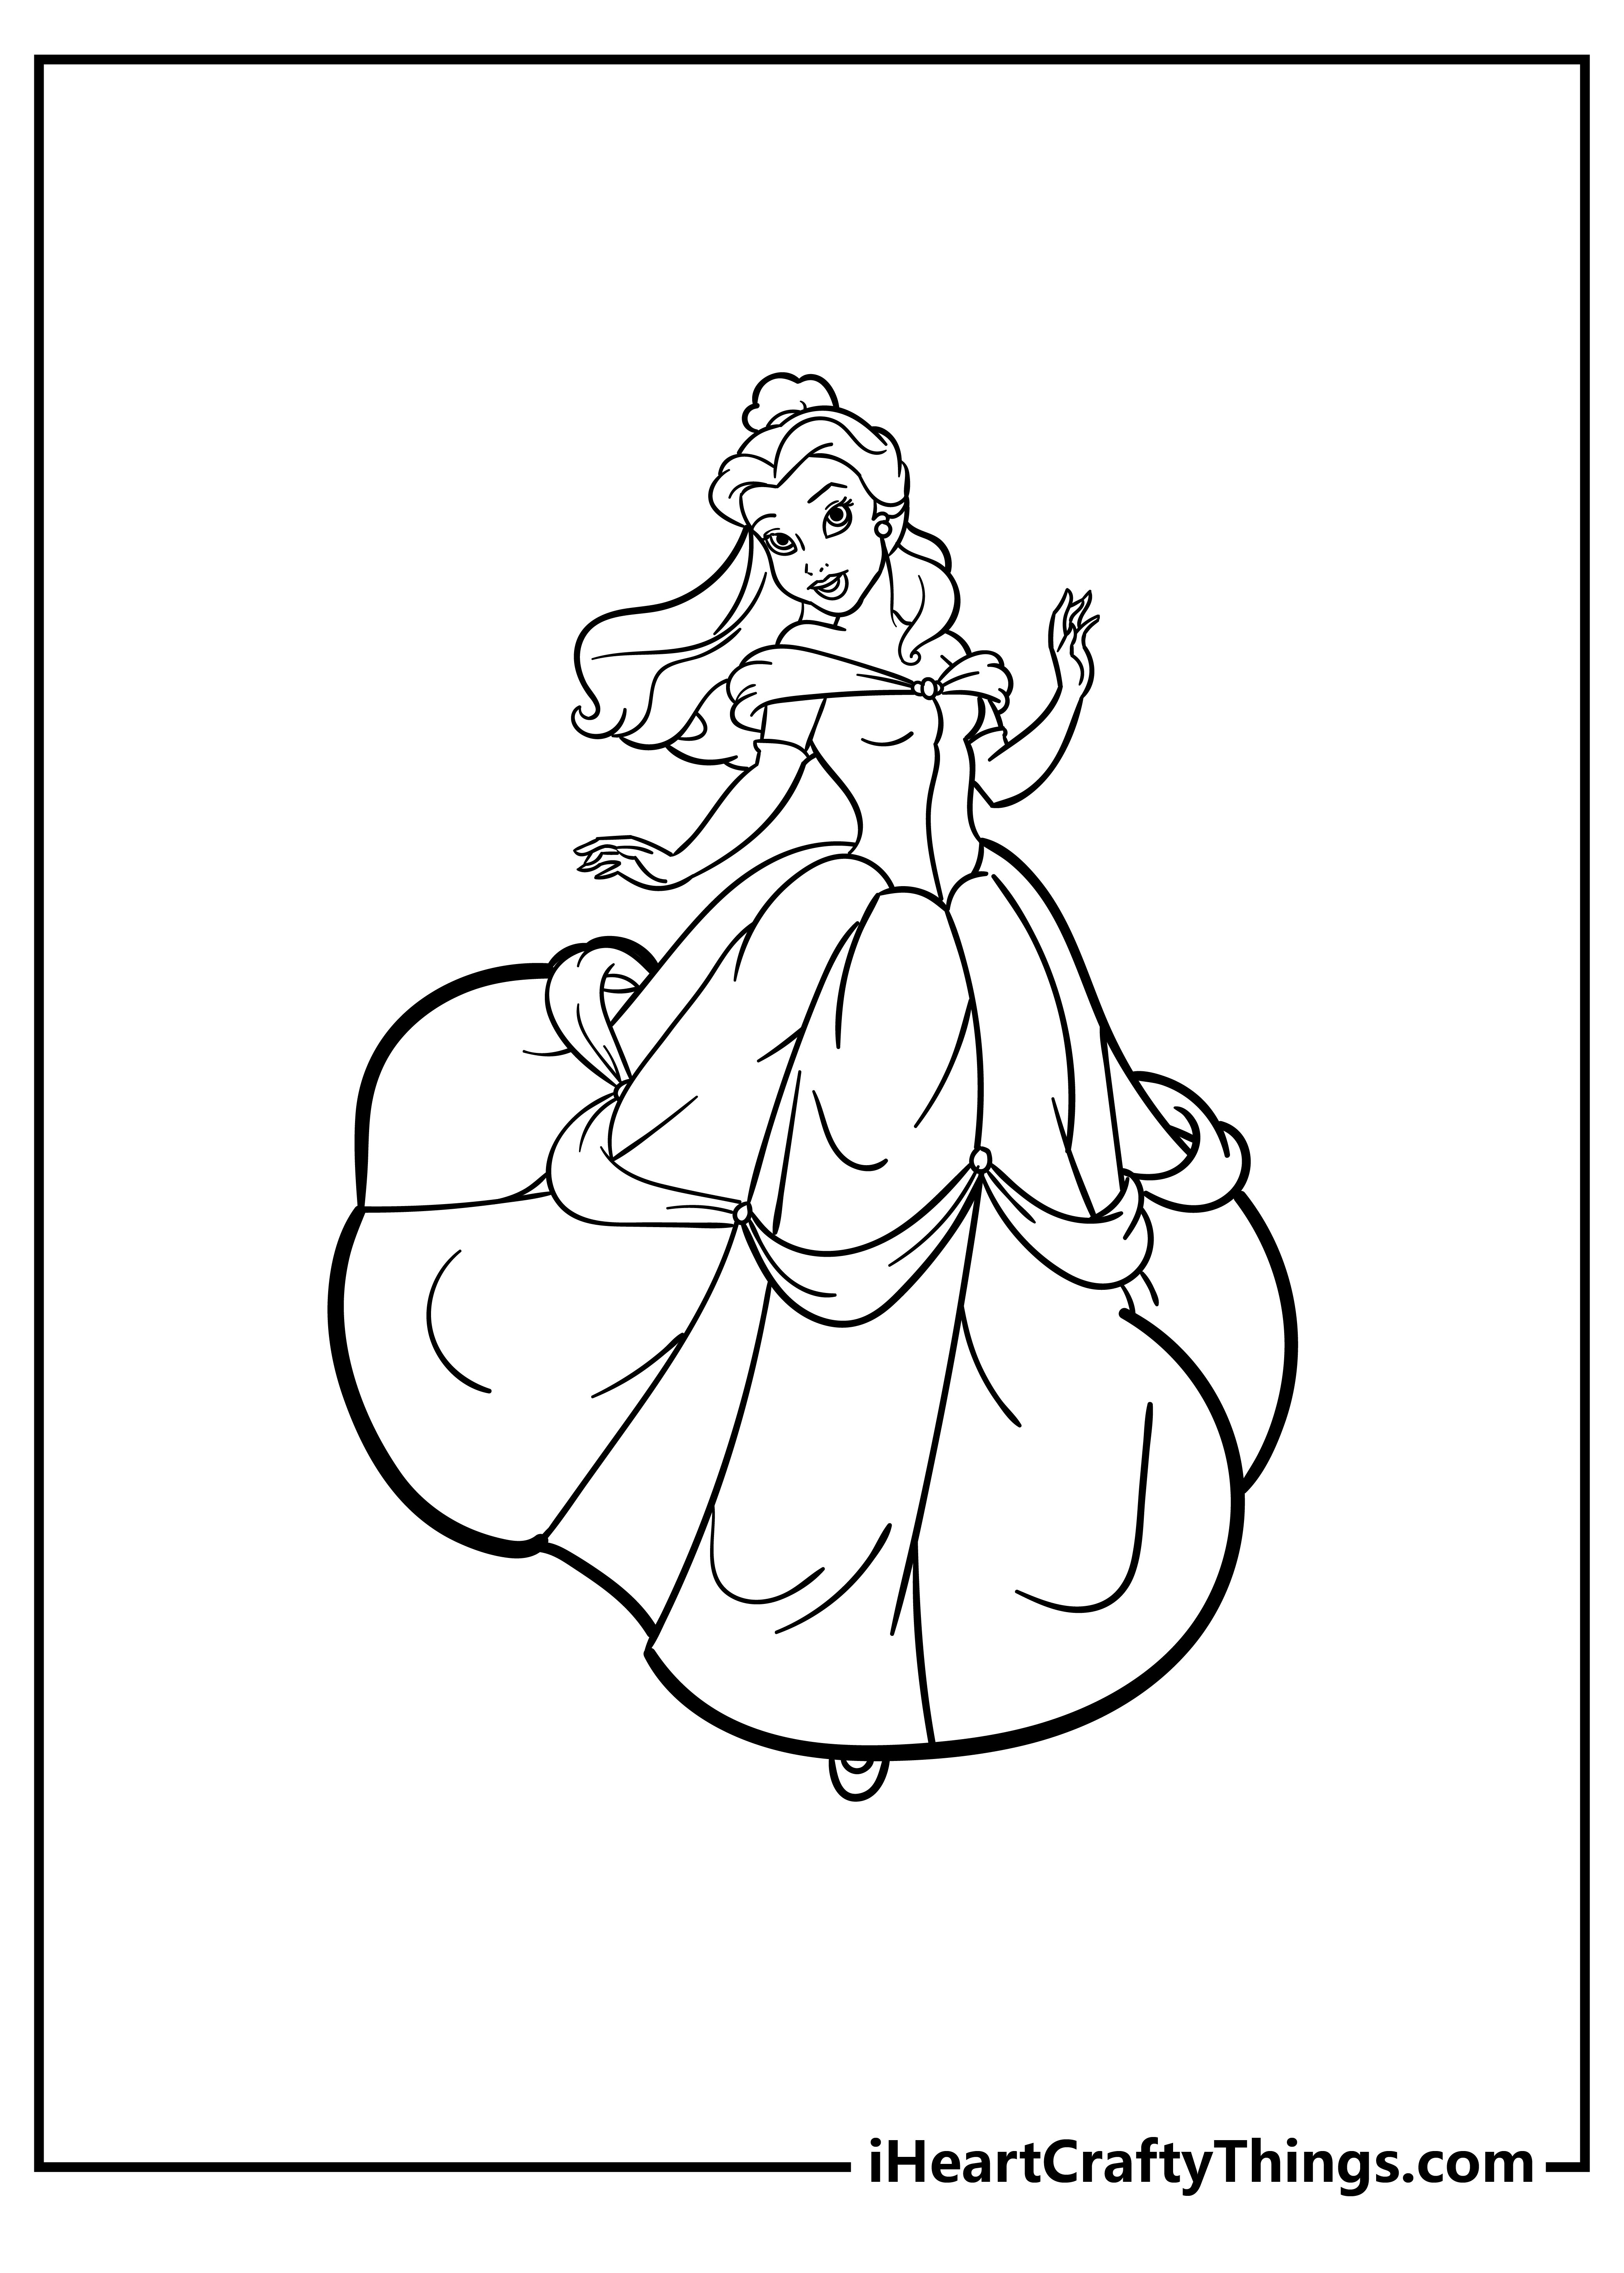 Beauty and the Beast Coloring Pages free pdf download